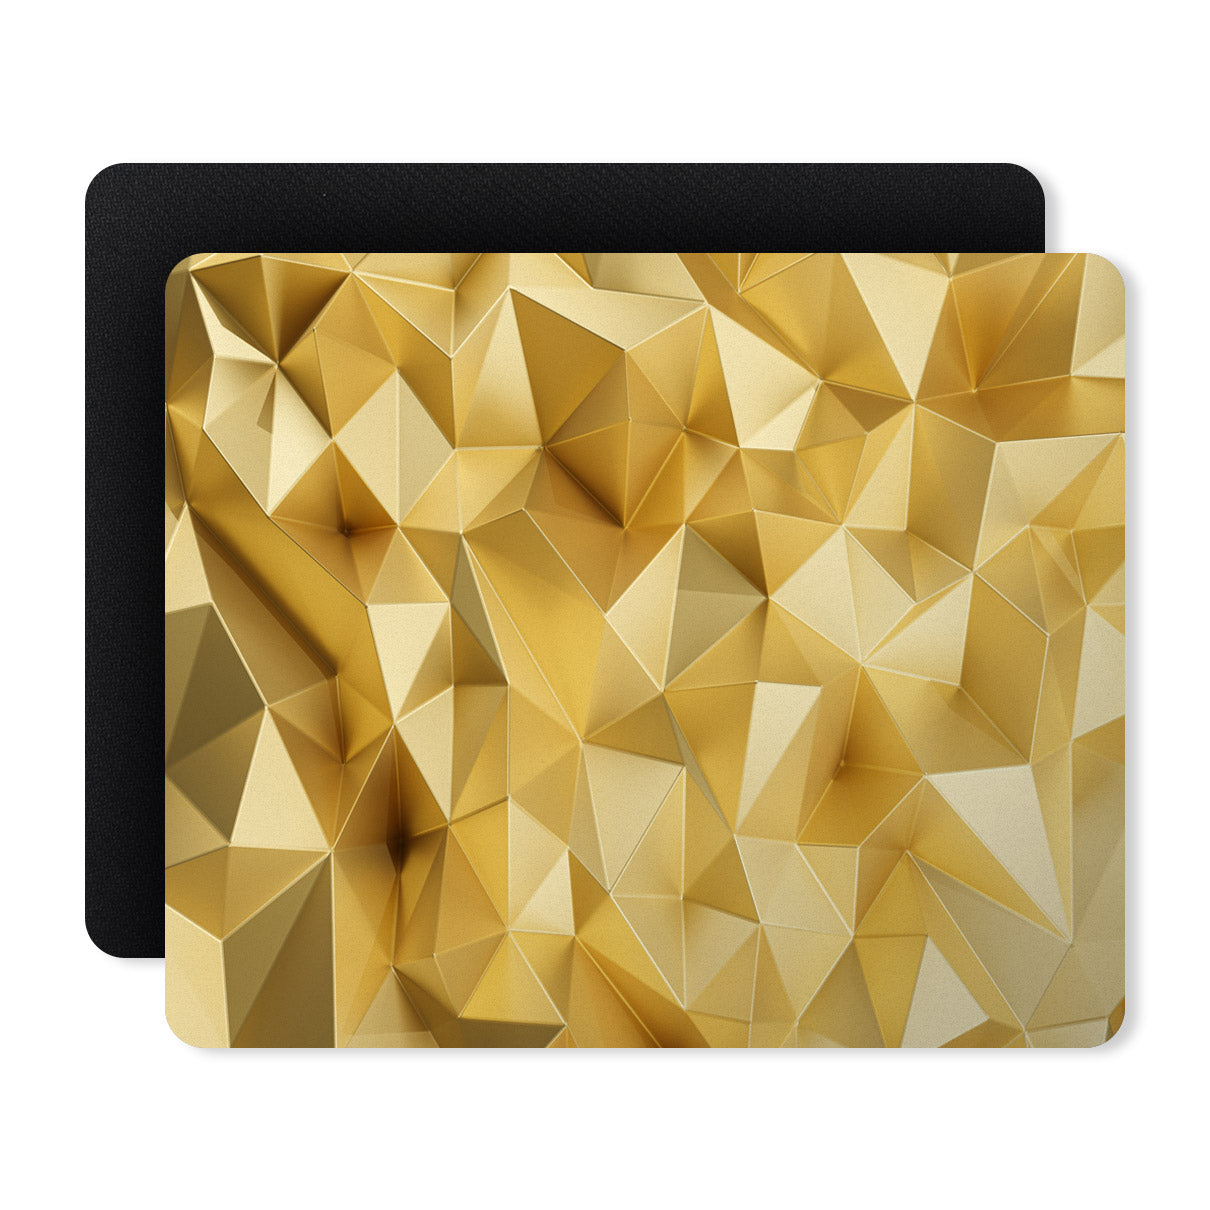 Golden Polygon Pattern Designer Printed Premium Mouse pad (9 in x 7.5 in)